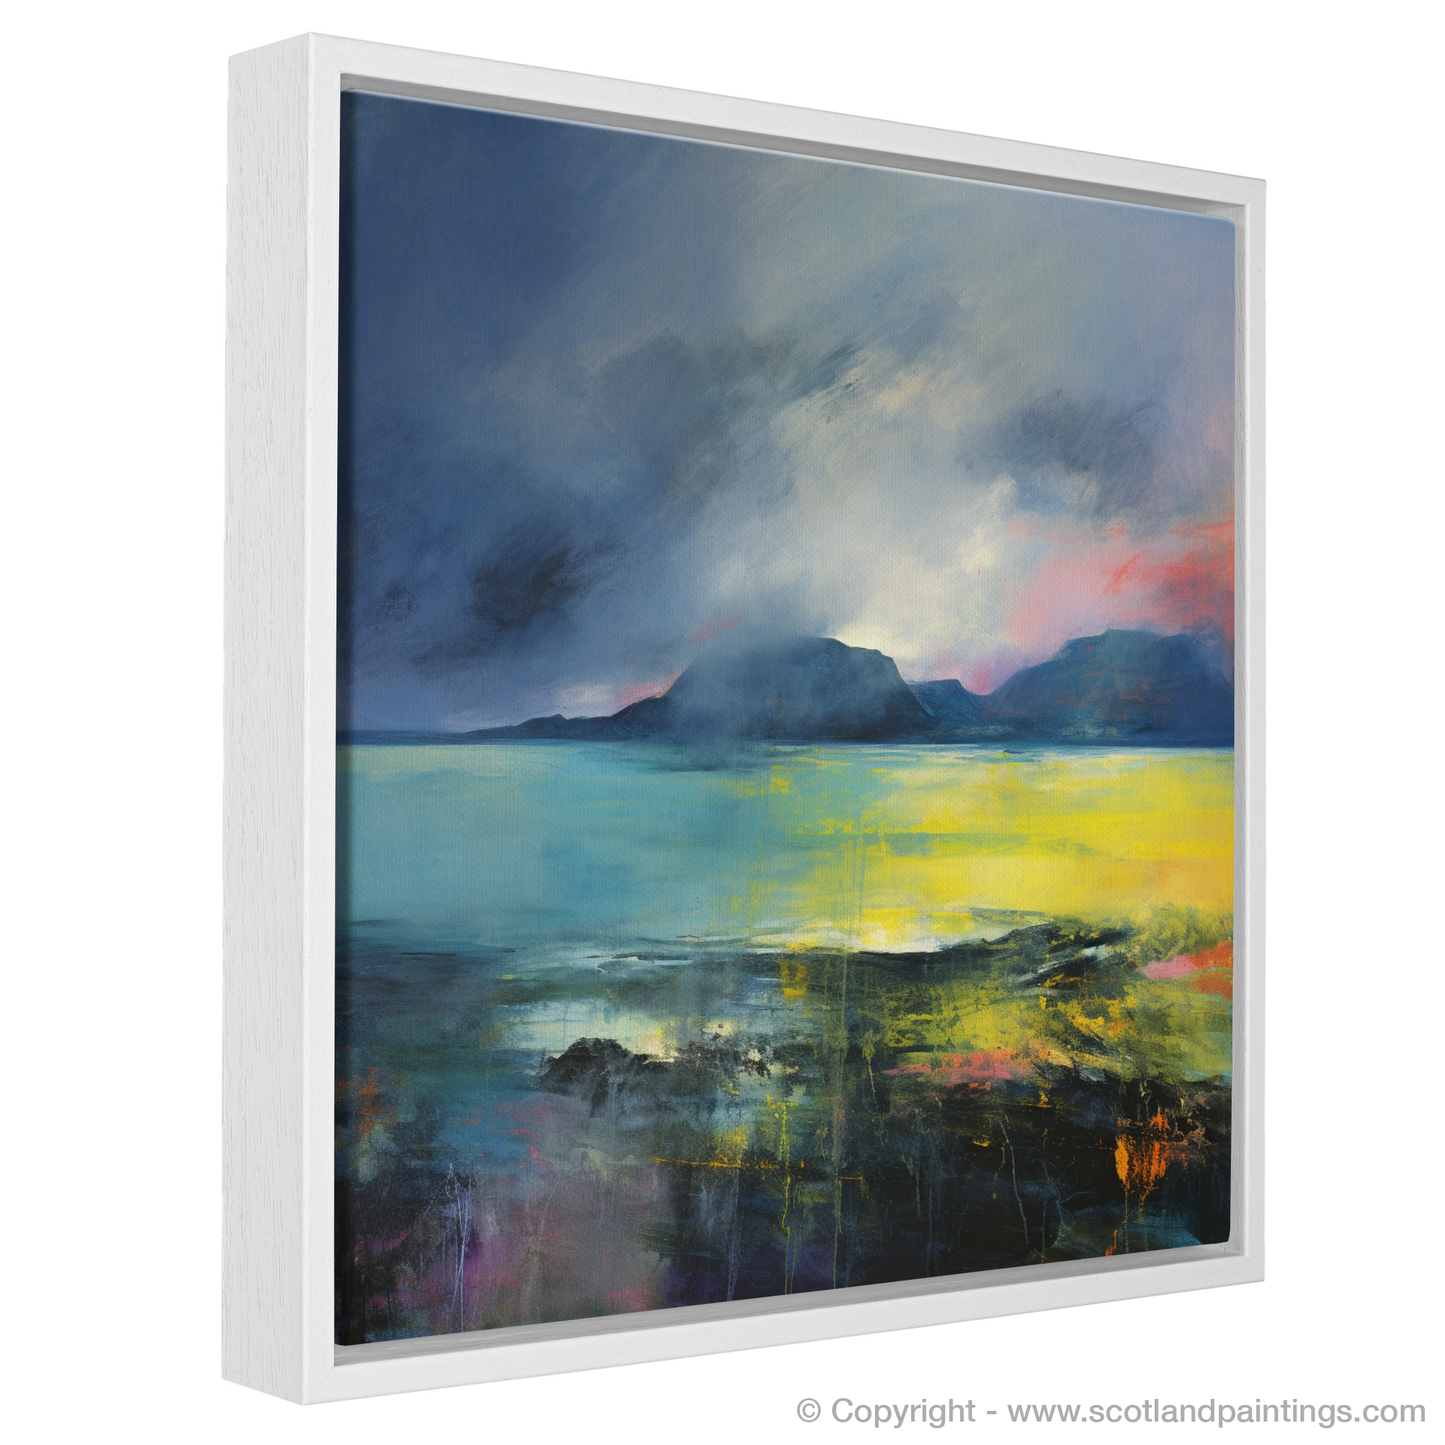 Painting and Art Print of Easdale Sound with a stormy sky entitled "Storm over Easdale Sound: An Abstract Expressionist Ode".